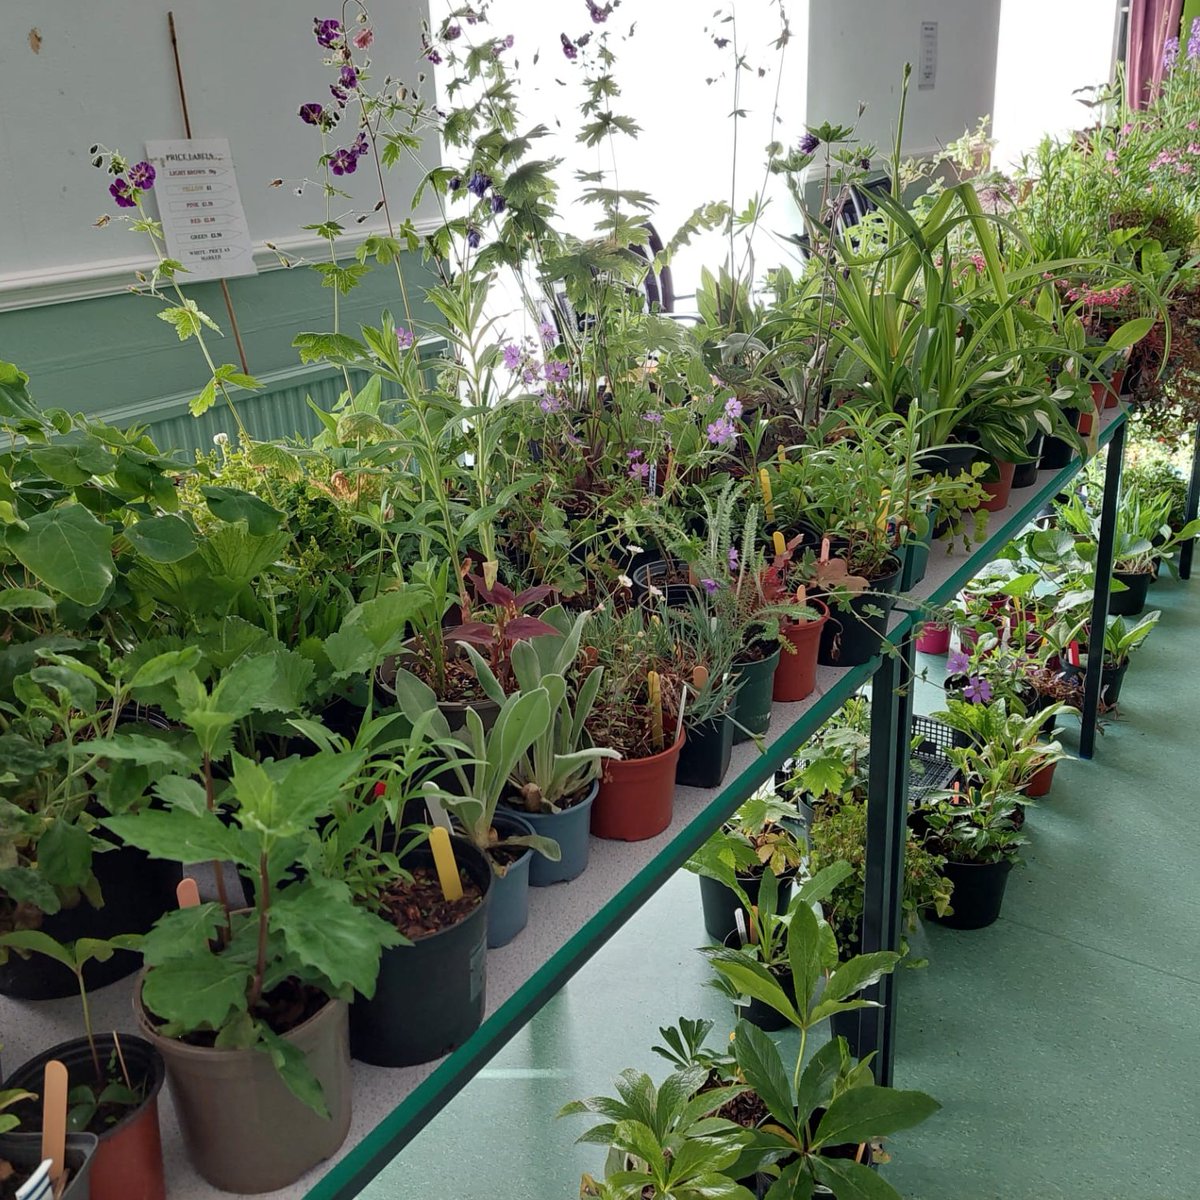 The popular annual plant sale for @GwentWildlife takes place on Saturday - May 11, 9.30-12.30 at the Palmer Centre, Chepstow. There will be an assortment of reasonably priced plants for sale cash only. If you would like to donate plants please contact Hilary on 01291 689326.